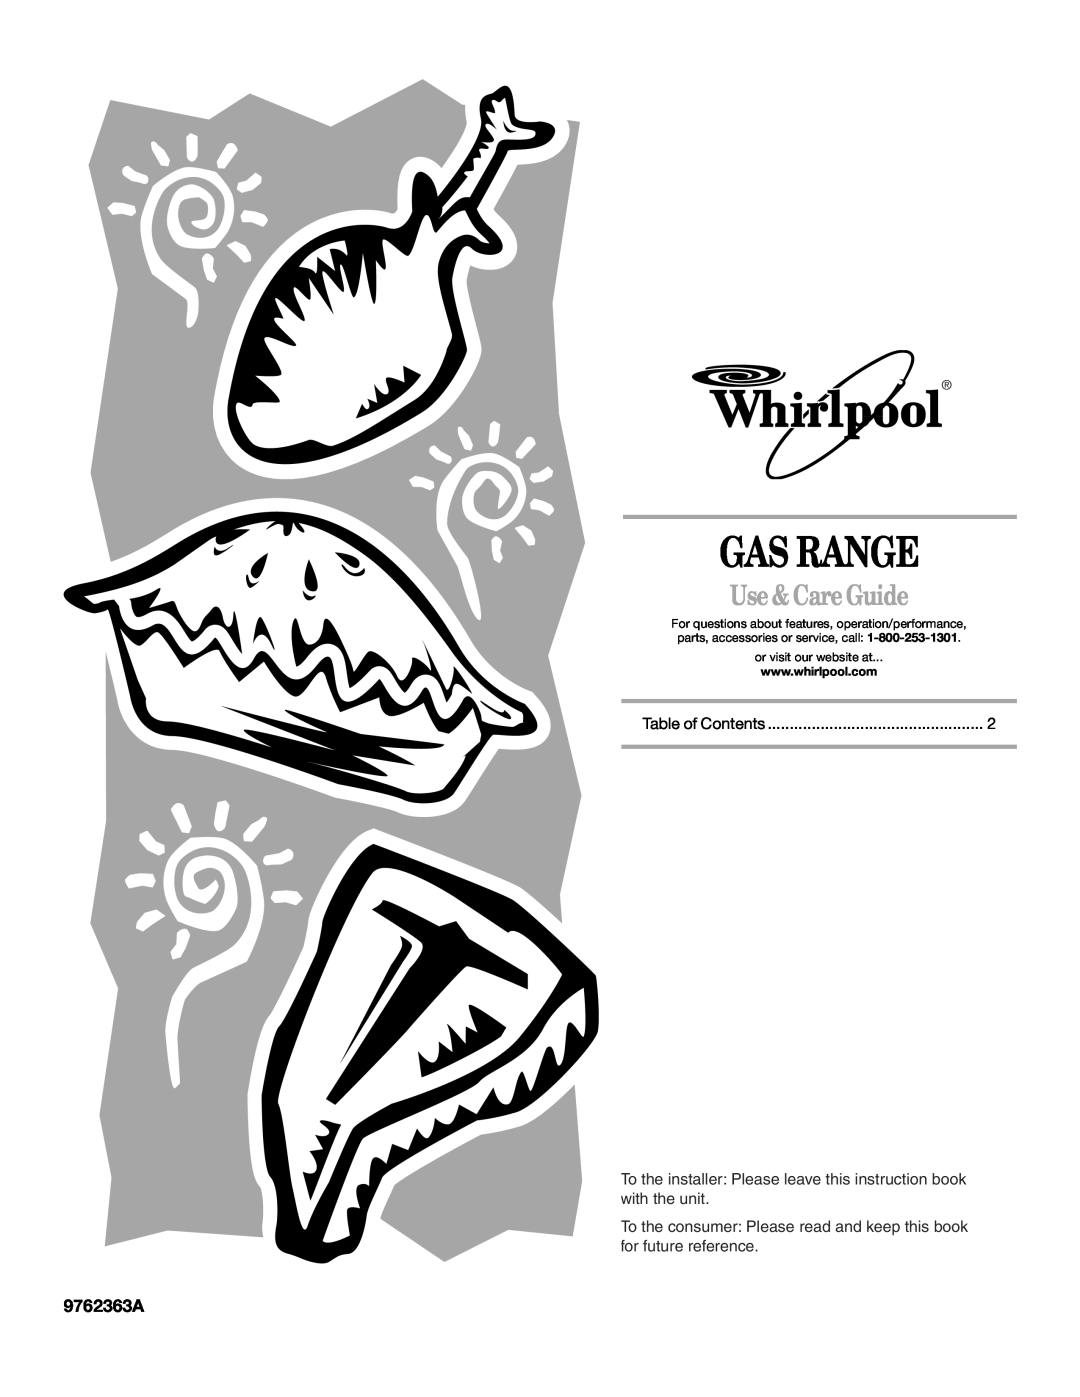 Whirlpool 9762363A manual Use & Care Guide, Gas Range, or visit our website at 